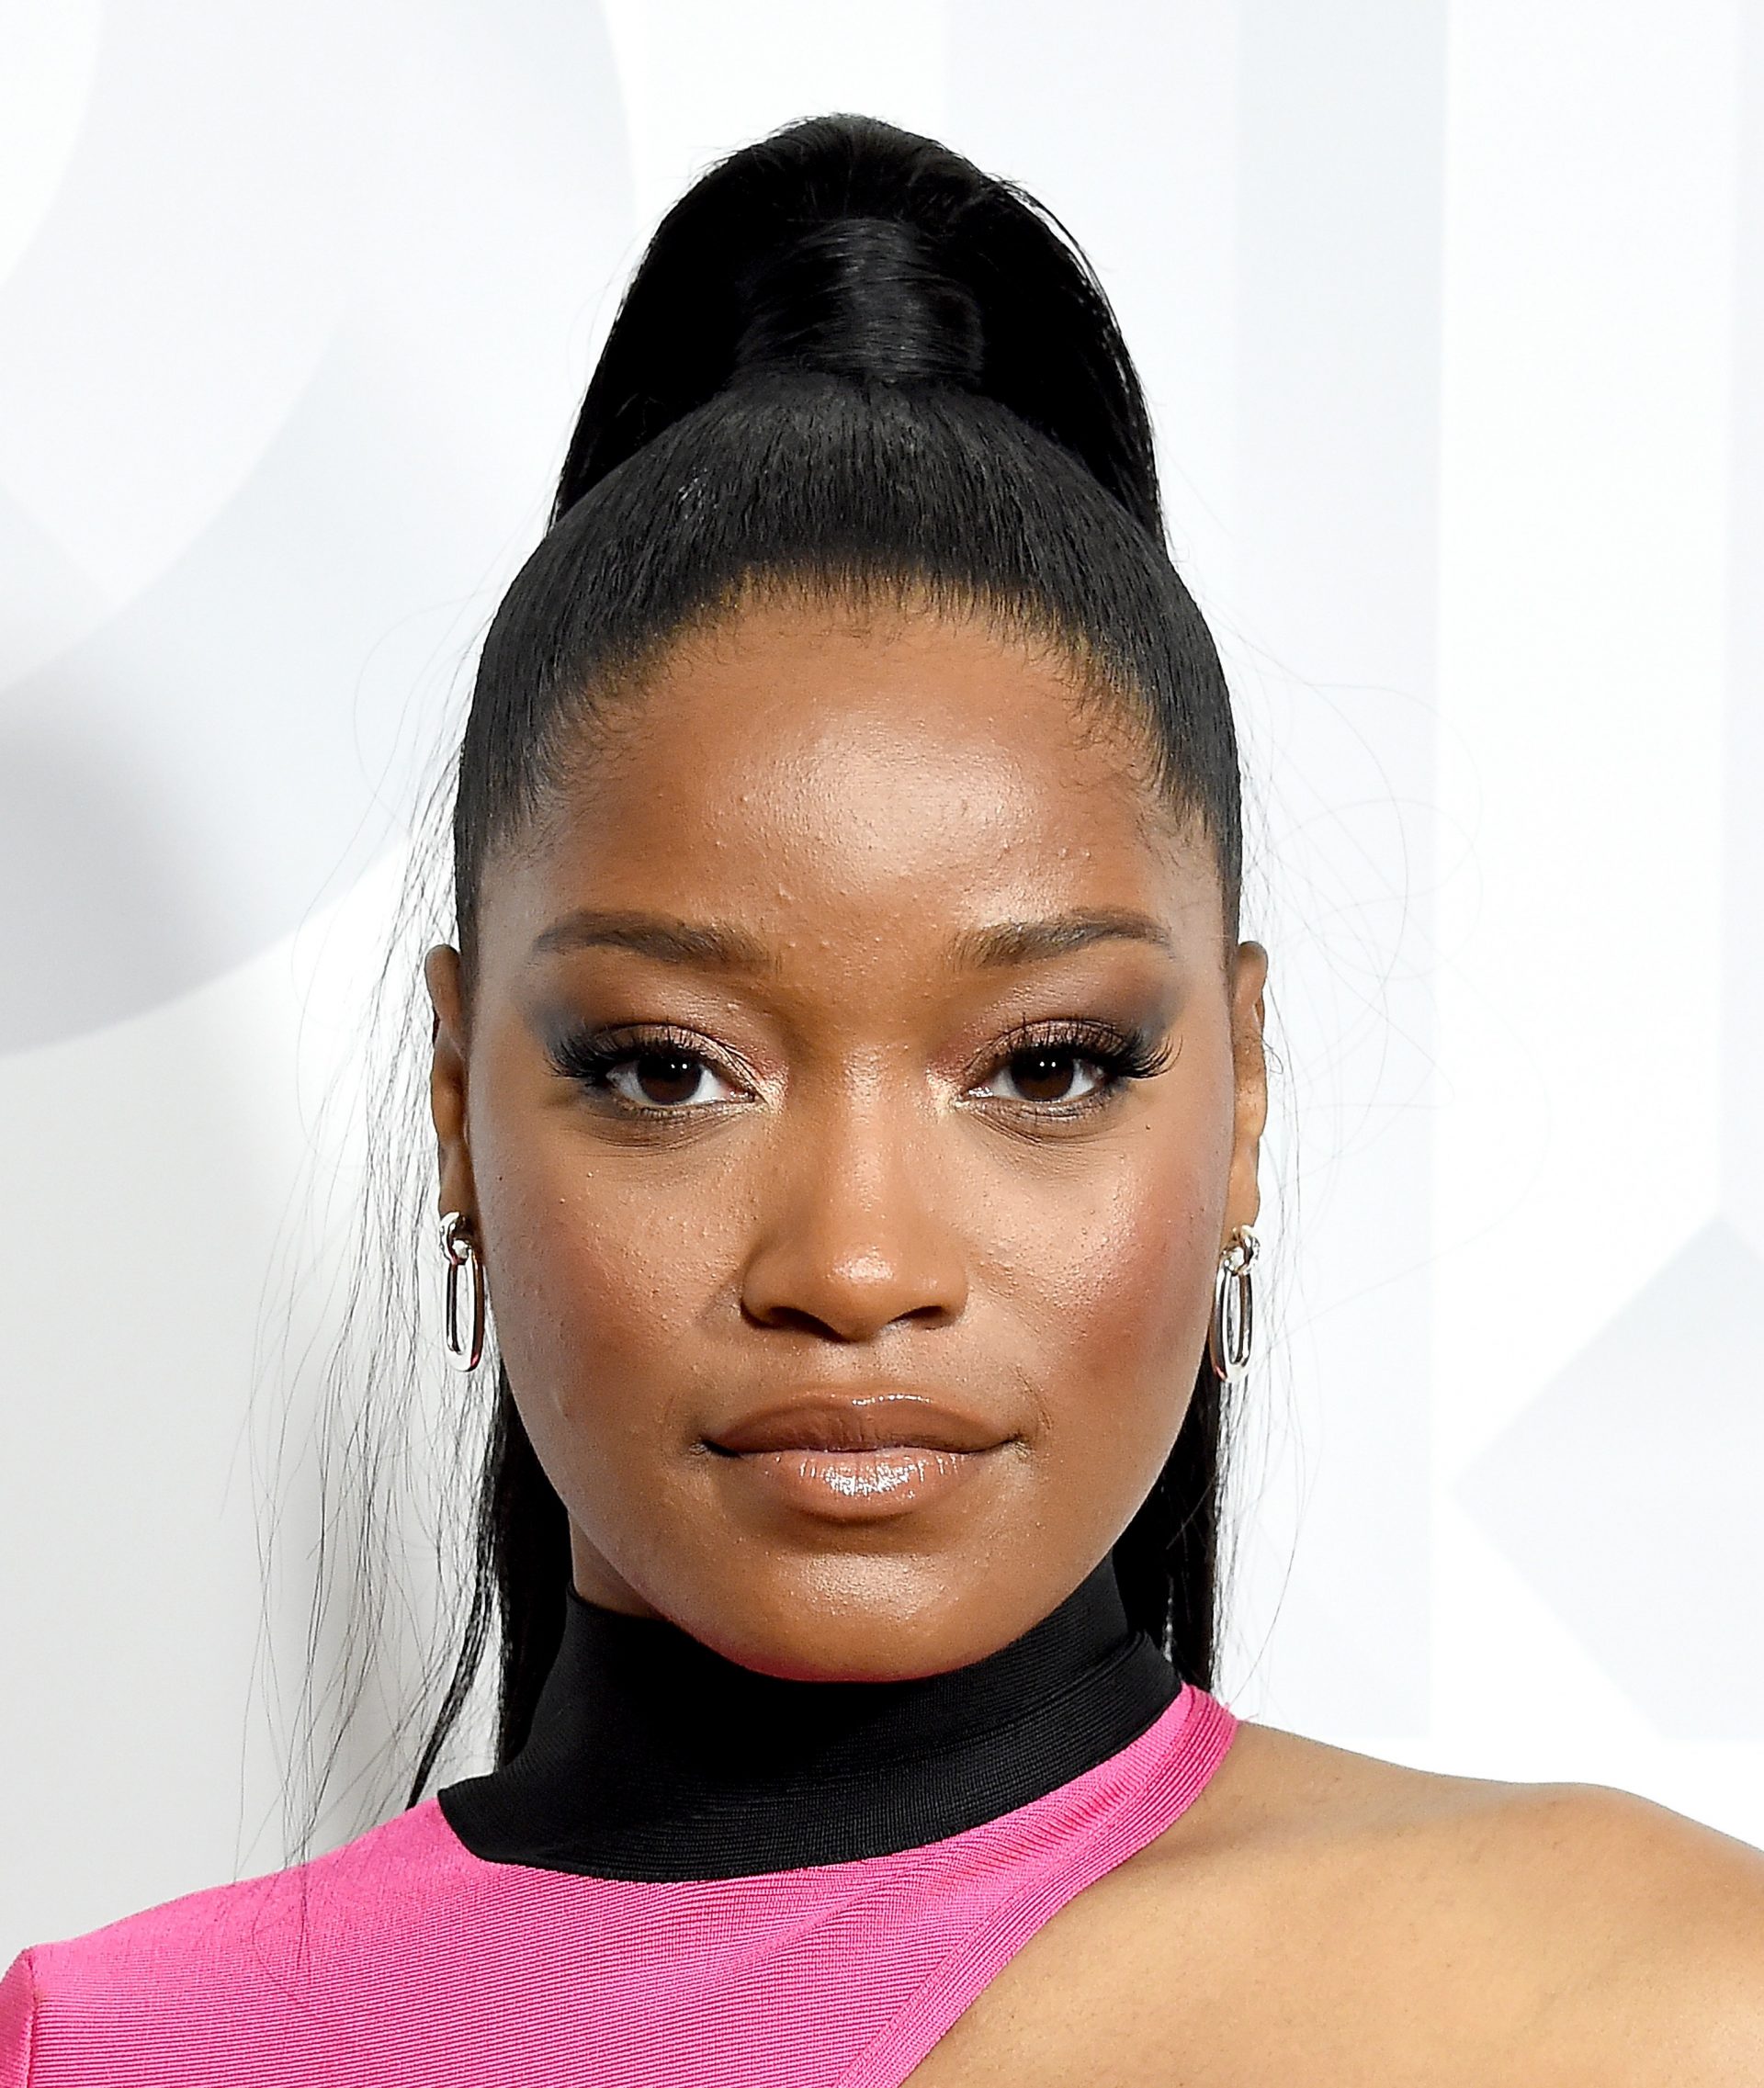 Keke Palmer Revealed She’s Been Struggling With PCOS and Zits in an Emotional Post